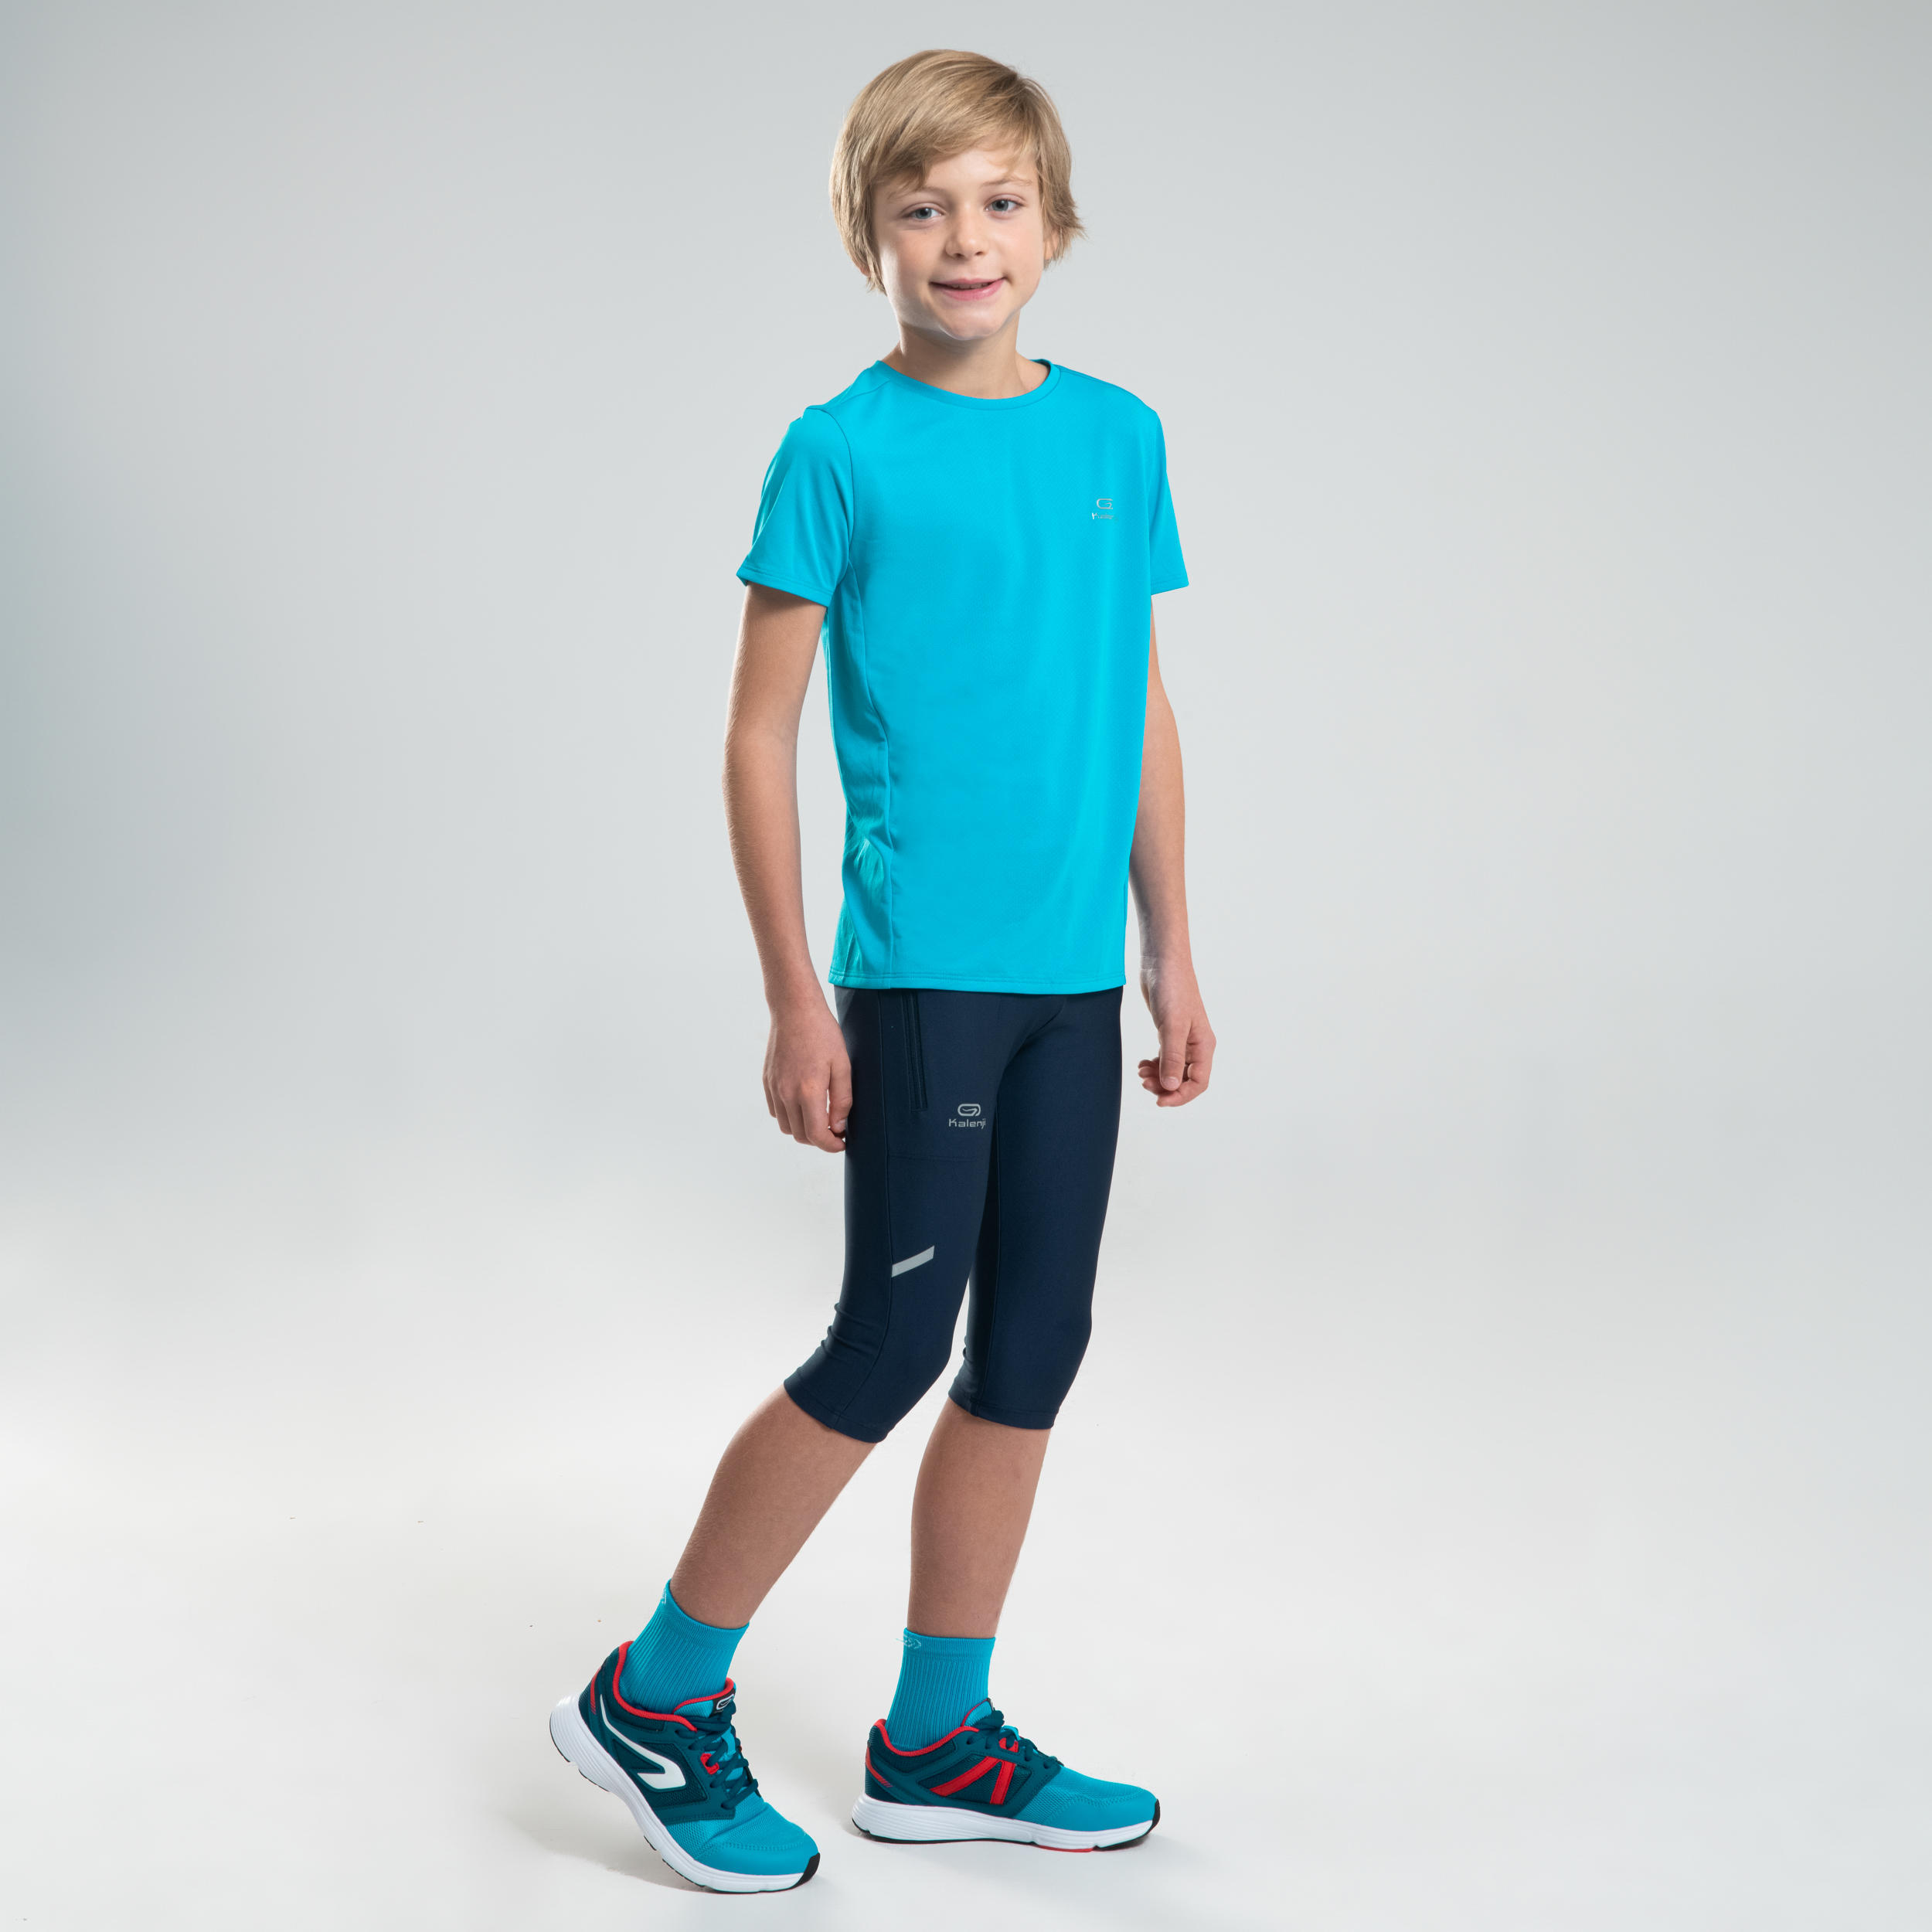 AT 100 KIDS' ATHLETICS CROPPED BOTTOMS - NAVY BLUE/TURQUOISE 4/6